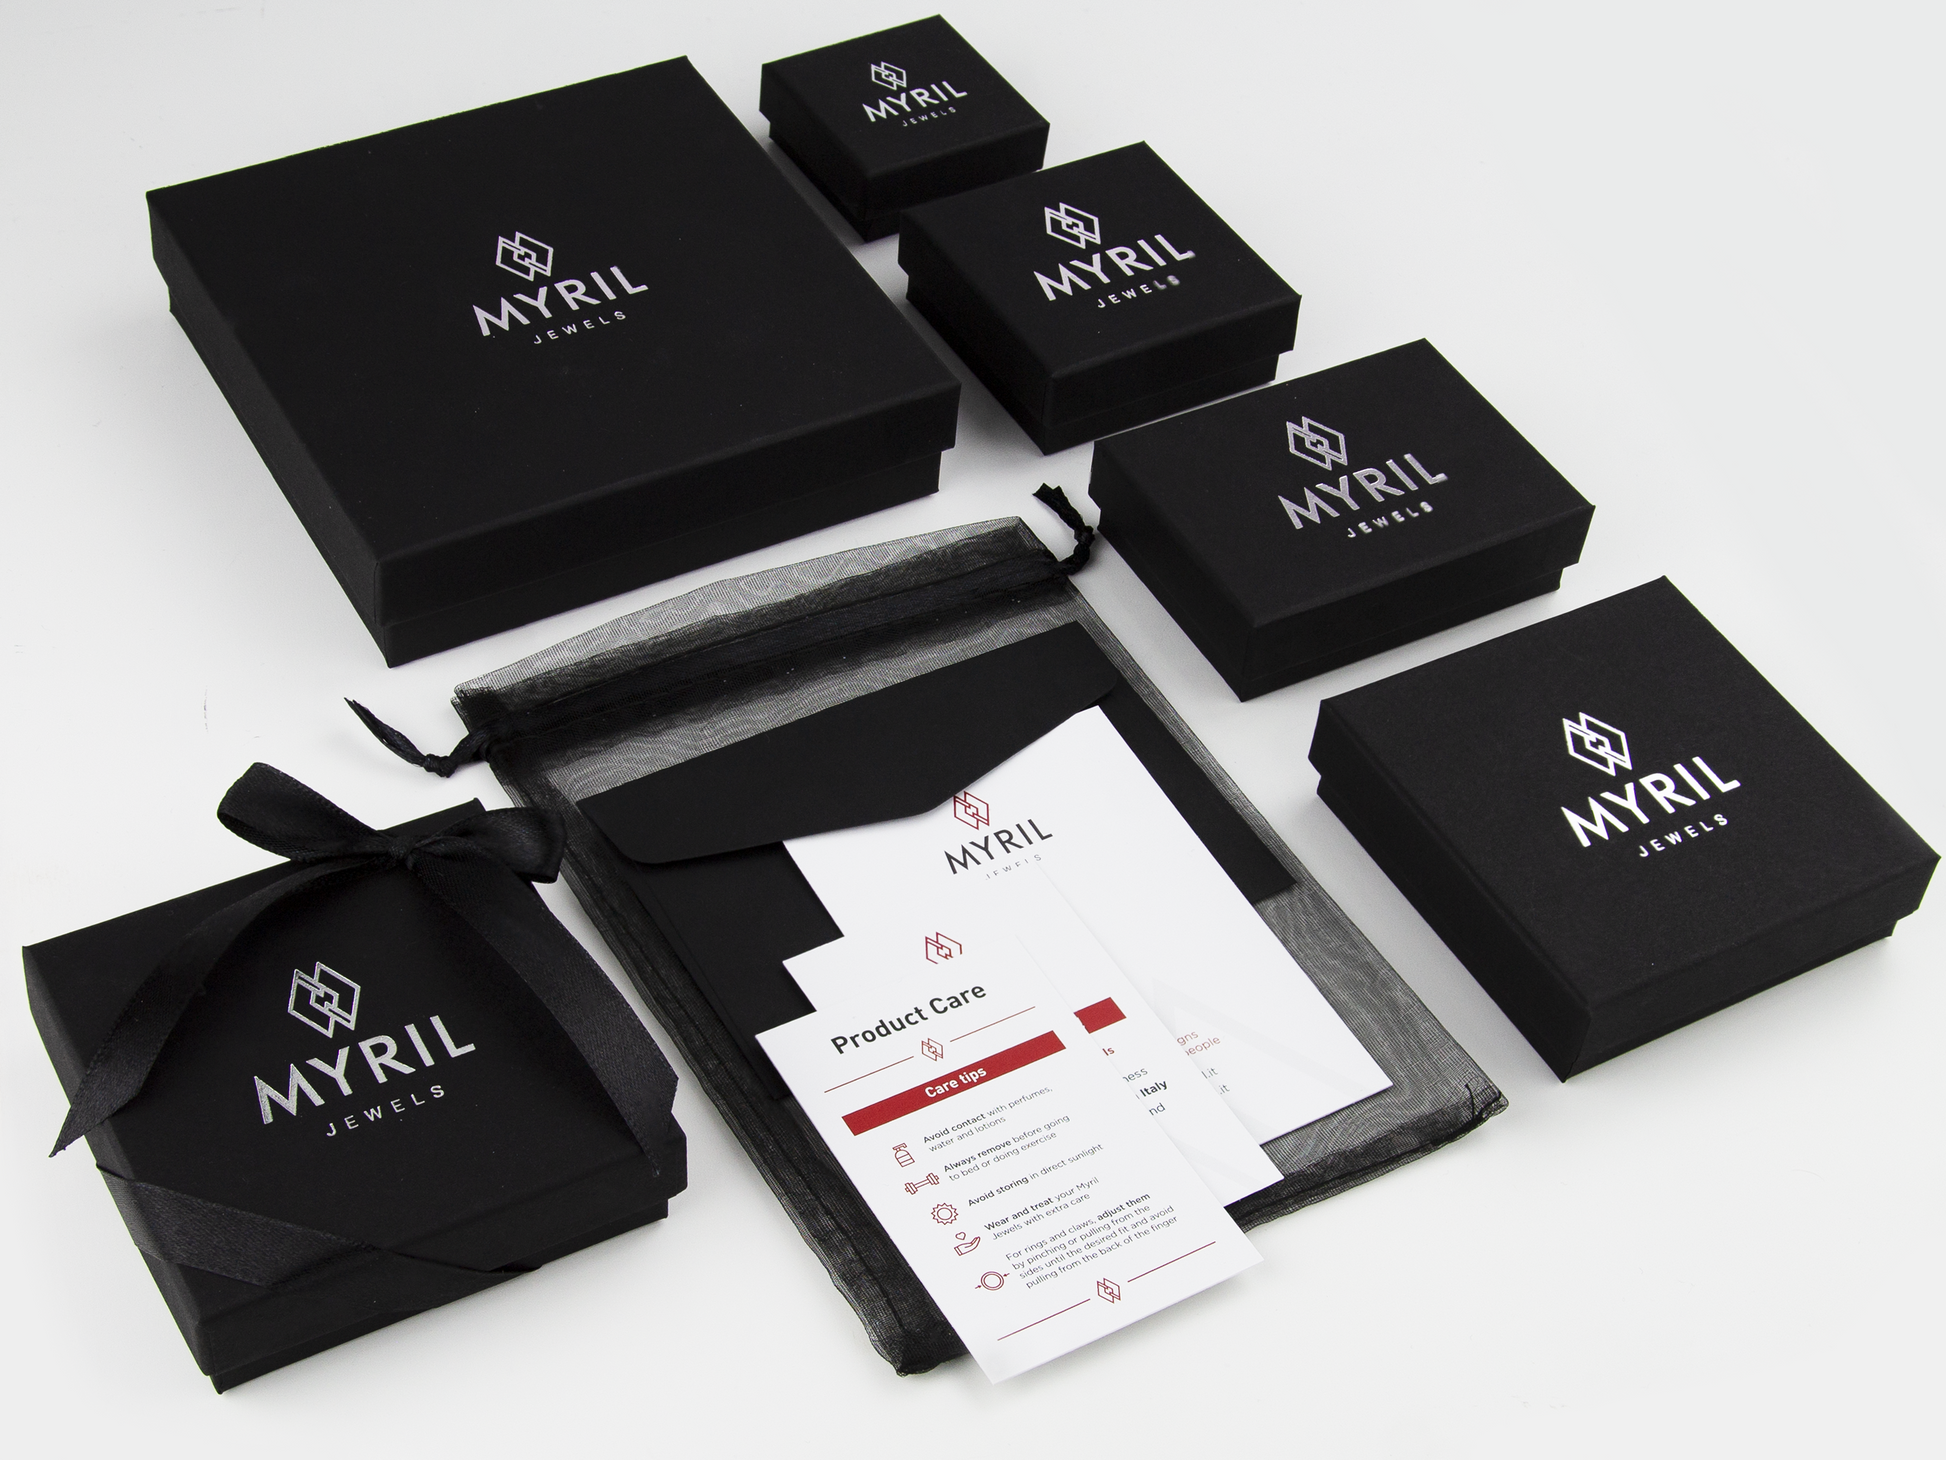 Discover Myril Jewels' exquisite packaging, perfect for presenting gothic-chic jewelry gifts. Each box reflects the brand's dark avant-garde style, ideal for Halloween, Witchcore enthusiasts, or everyday gothic glamour.